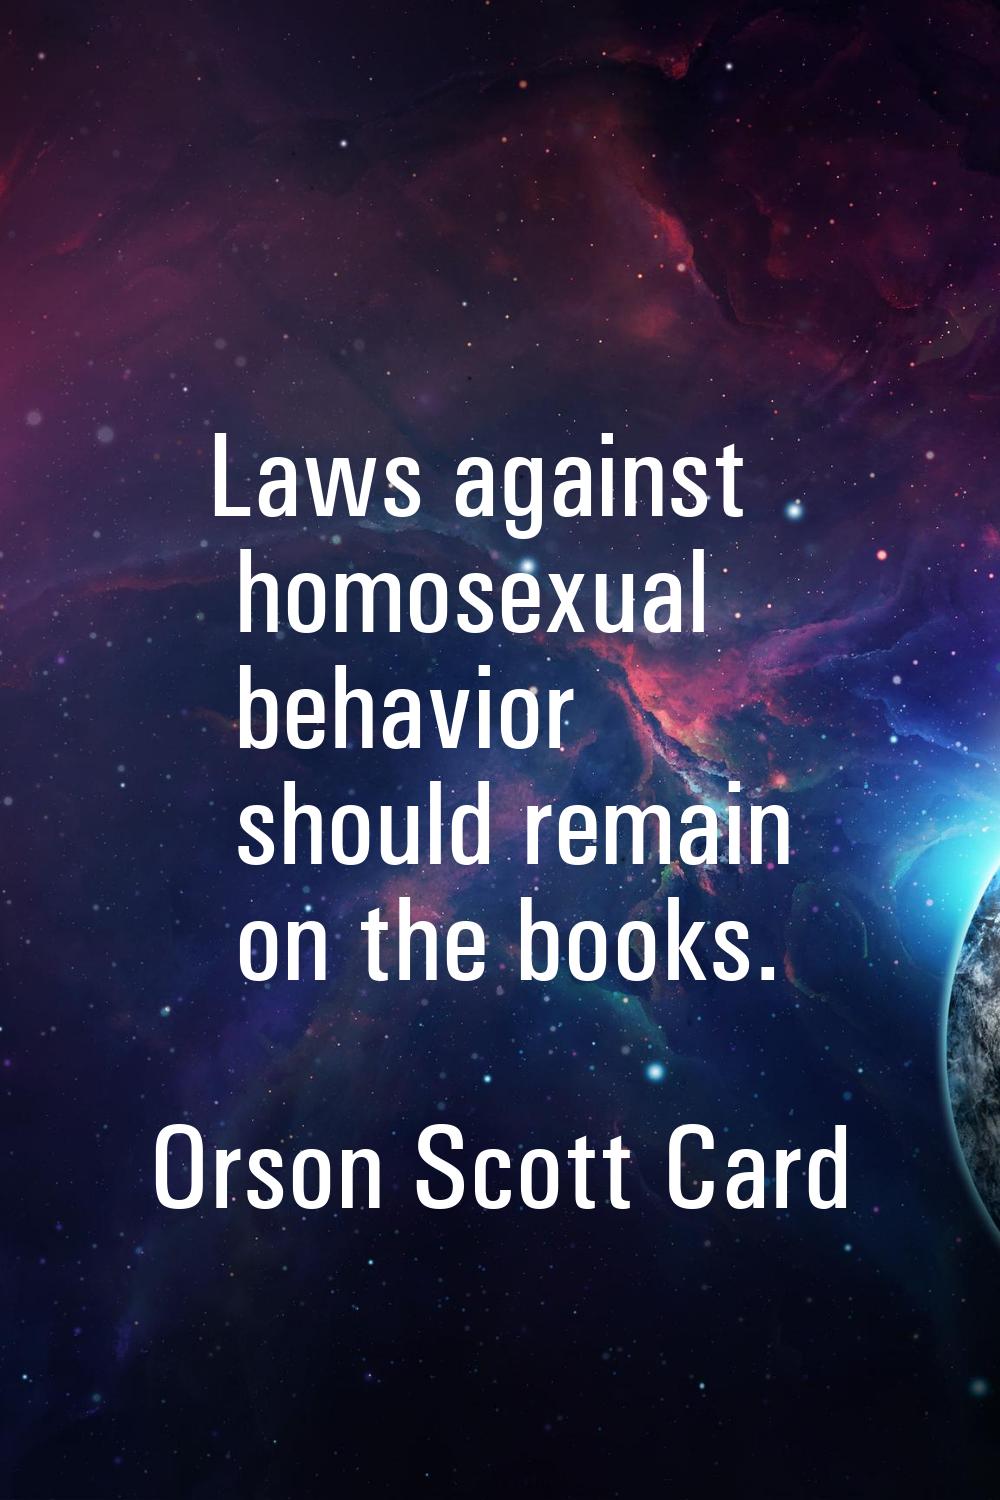 Laws against homosexual behavior should remain on the books.